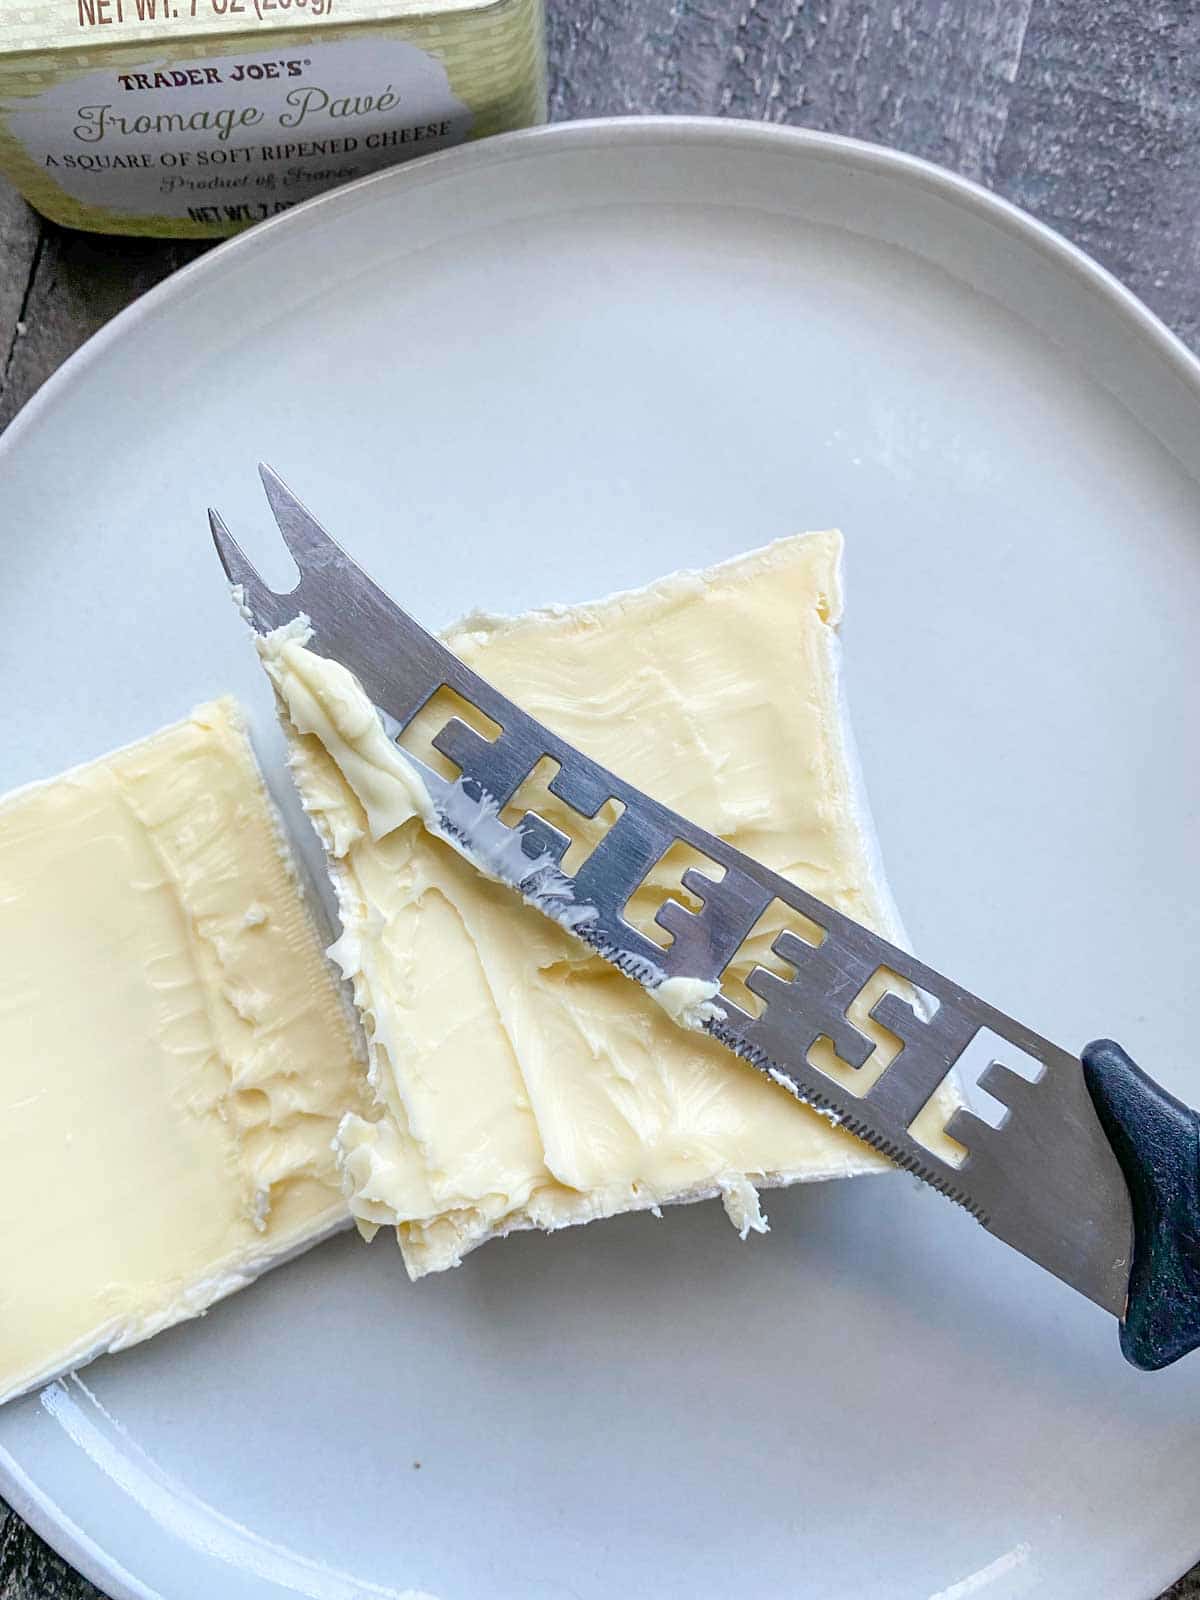 Fromage pavé cheese block from Trader Joe's sliced in half with knife that says "cheese"